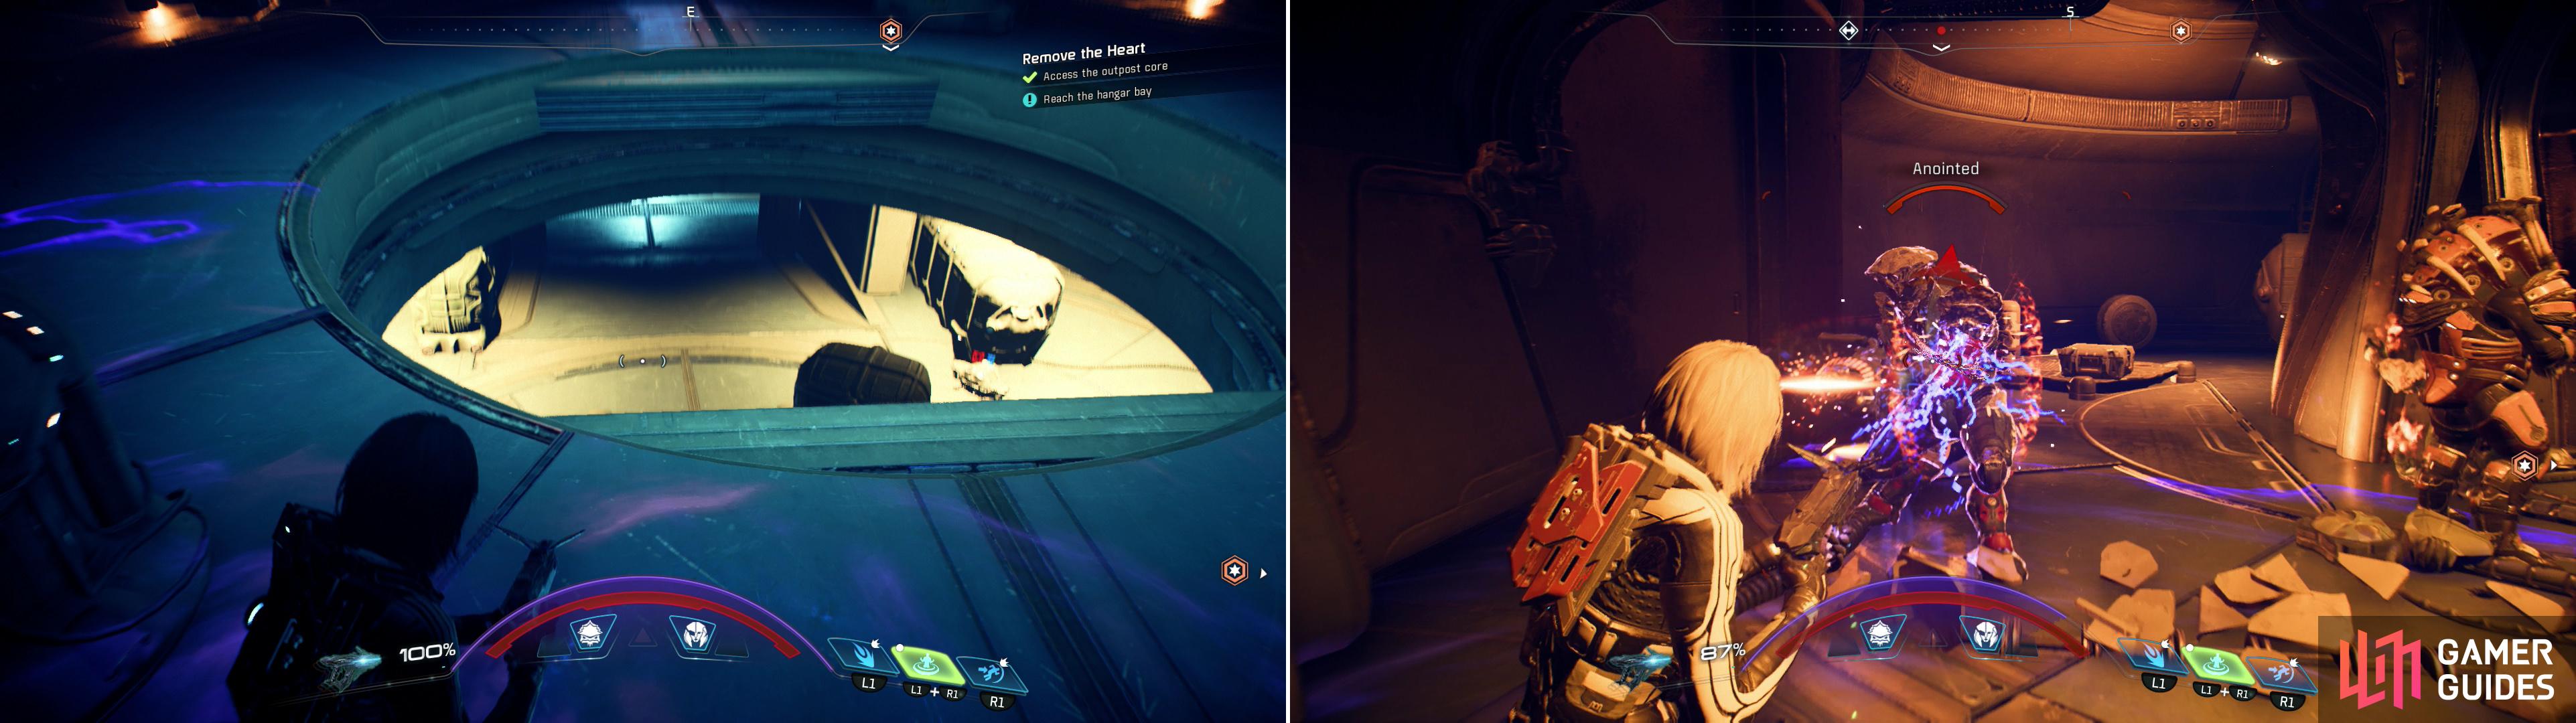 Drop down the hole to reach the base's core facilities (left) and kill whatever Kett you find waiting for you (right).